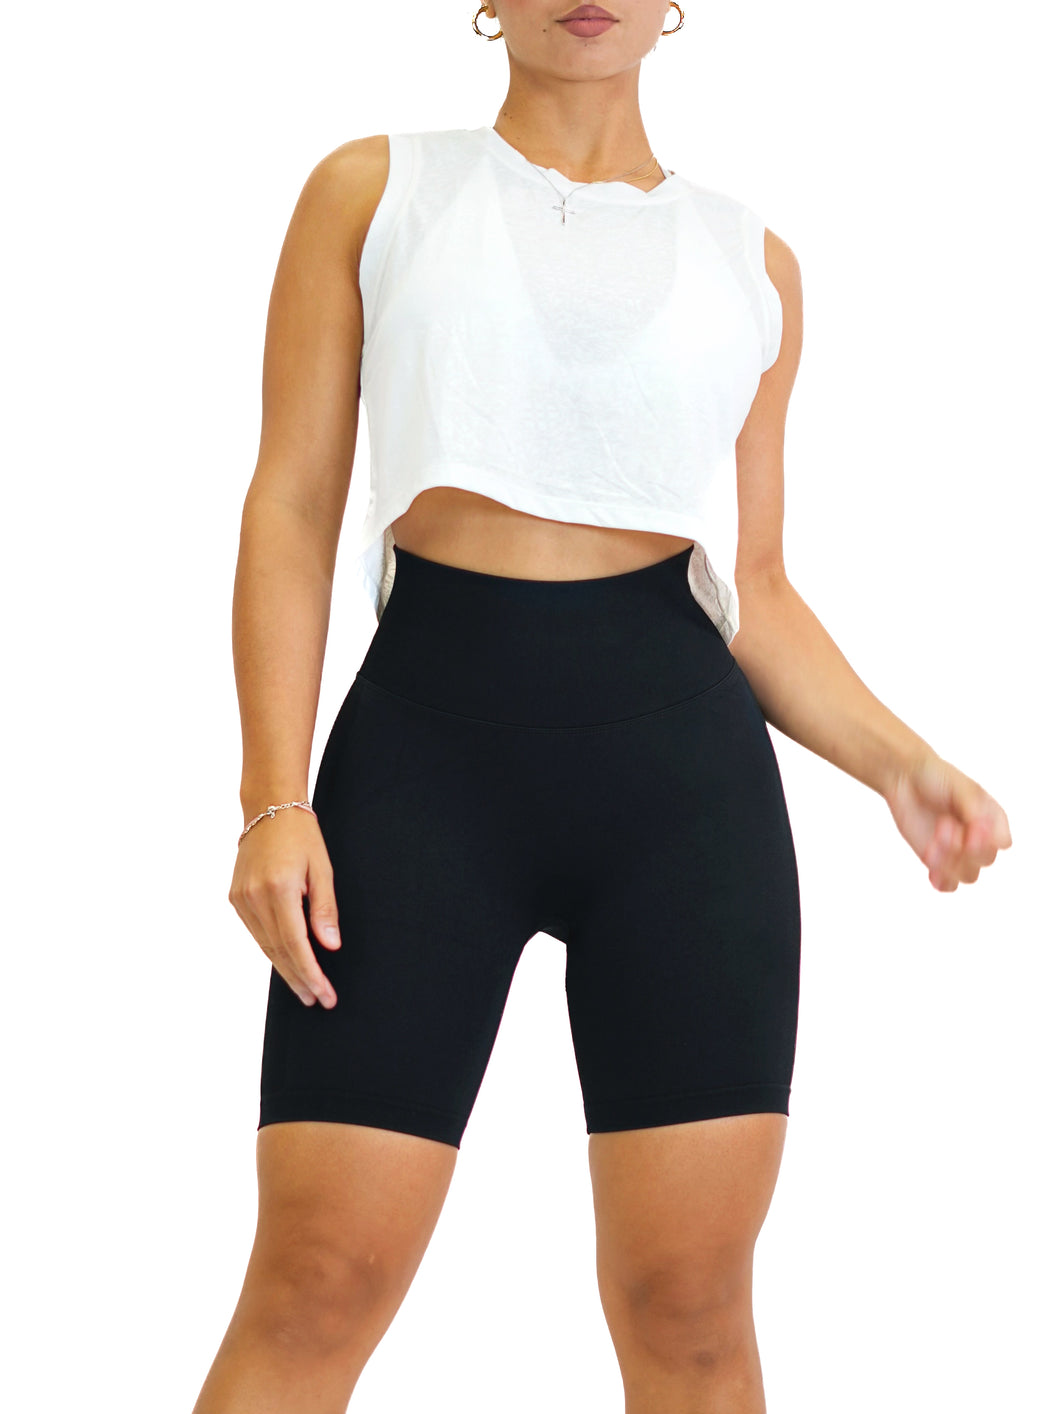 HIIT Coverage Crop Top (White)